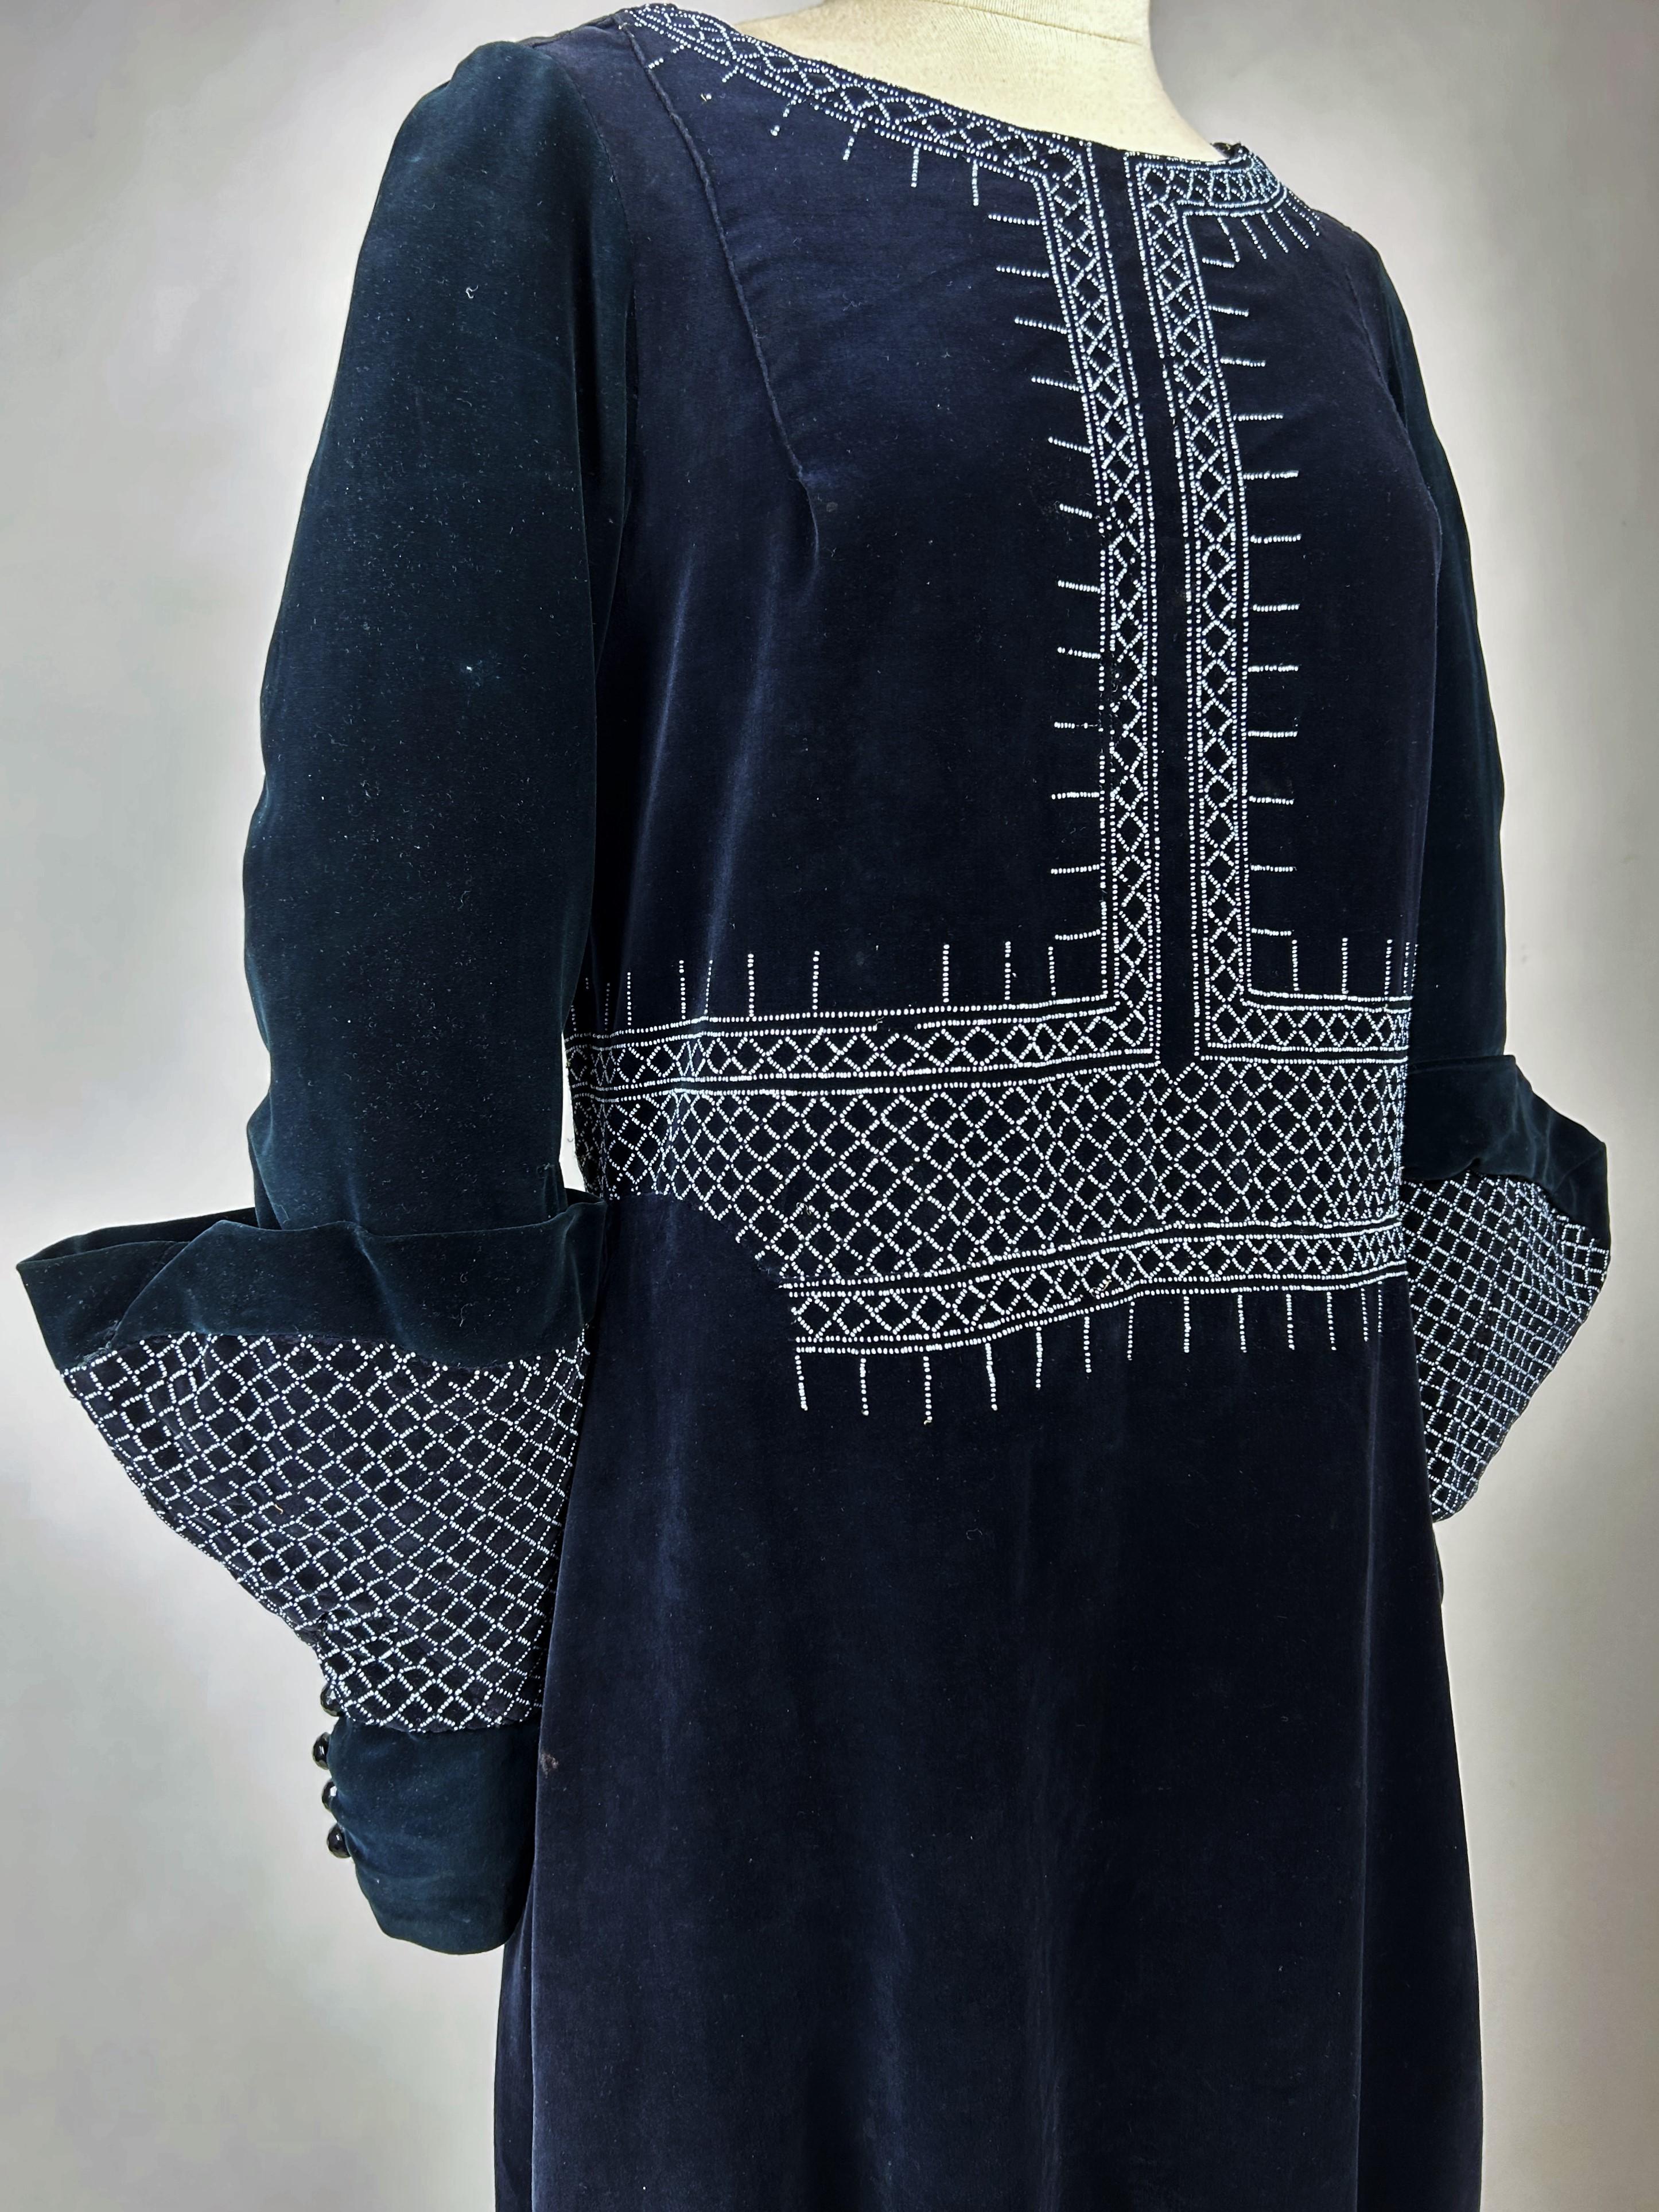 Circa 1925-1930

France

Unidentified Couture day dress in navy velvet and white glass bead sablé dating from the Art Deco period. A Sac dress Cut, oval neckline and long sleeves with musketeer cuffs. Very refined embroidery in sandblasted pearls